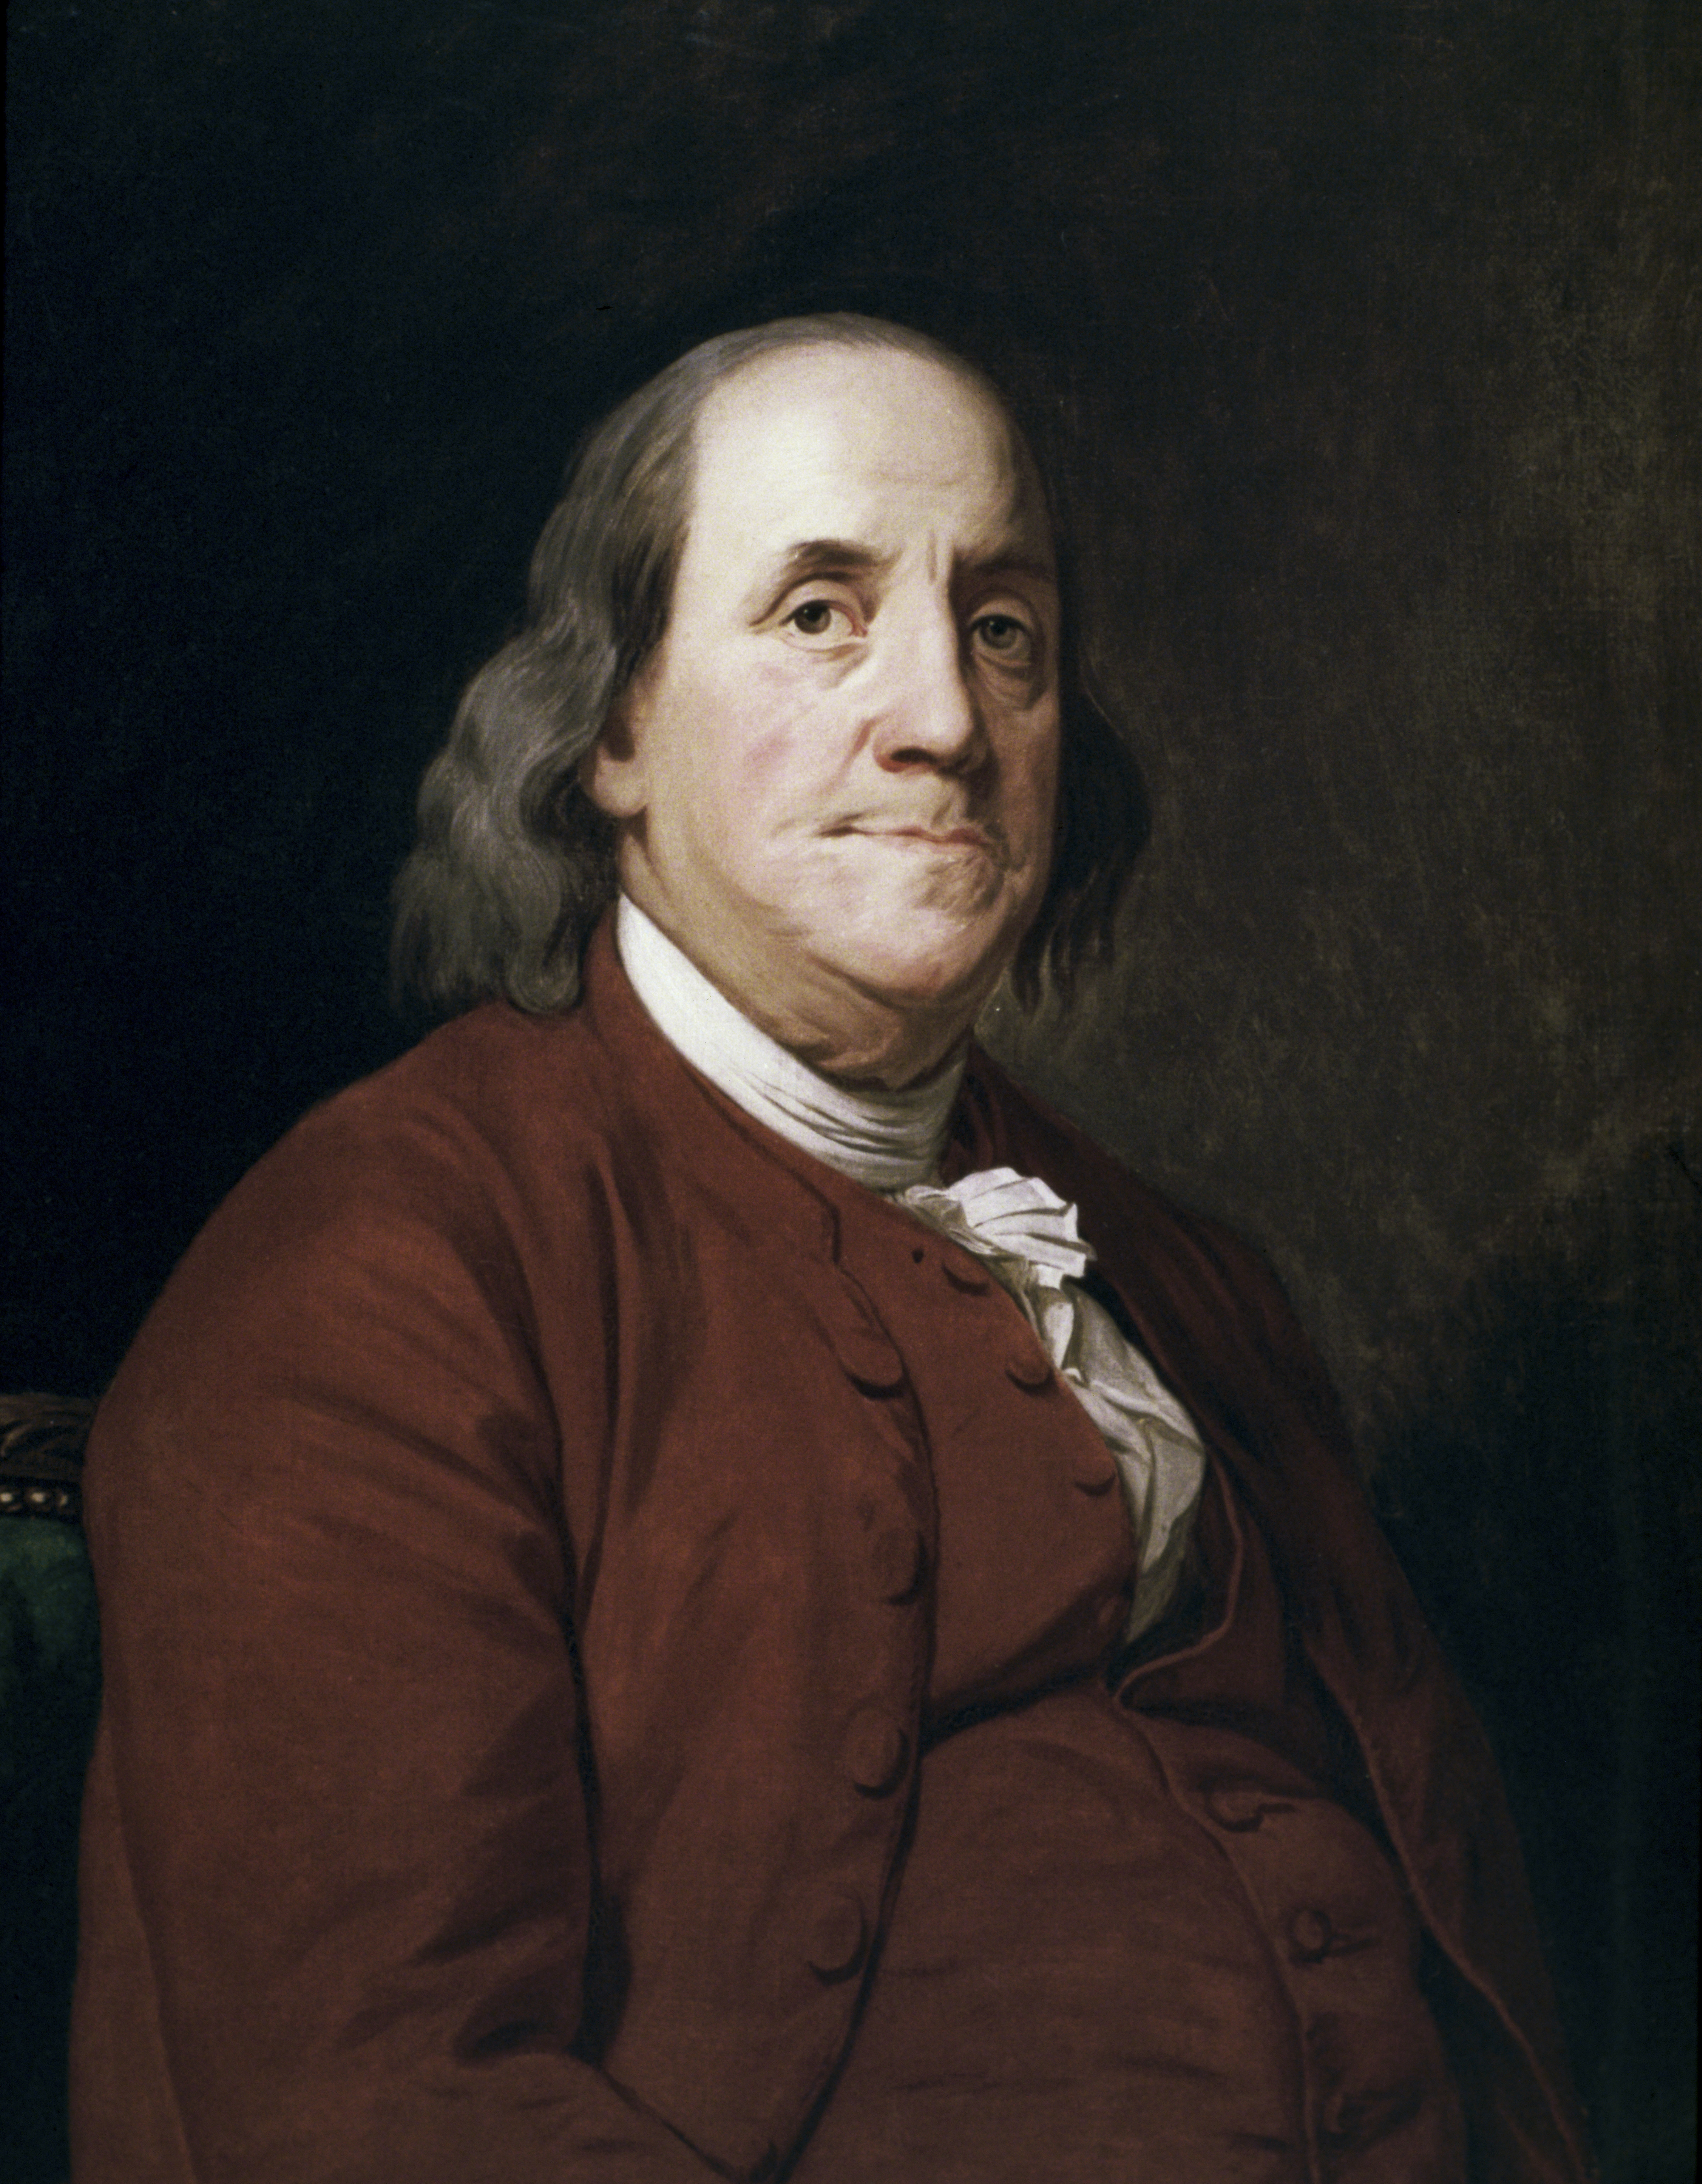 Portrait of Benjamin Franklin by Joseph Wright at Corcoran Gallery of Art in Washington, D.C.